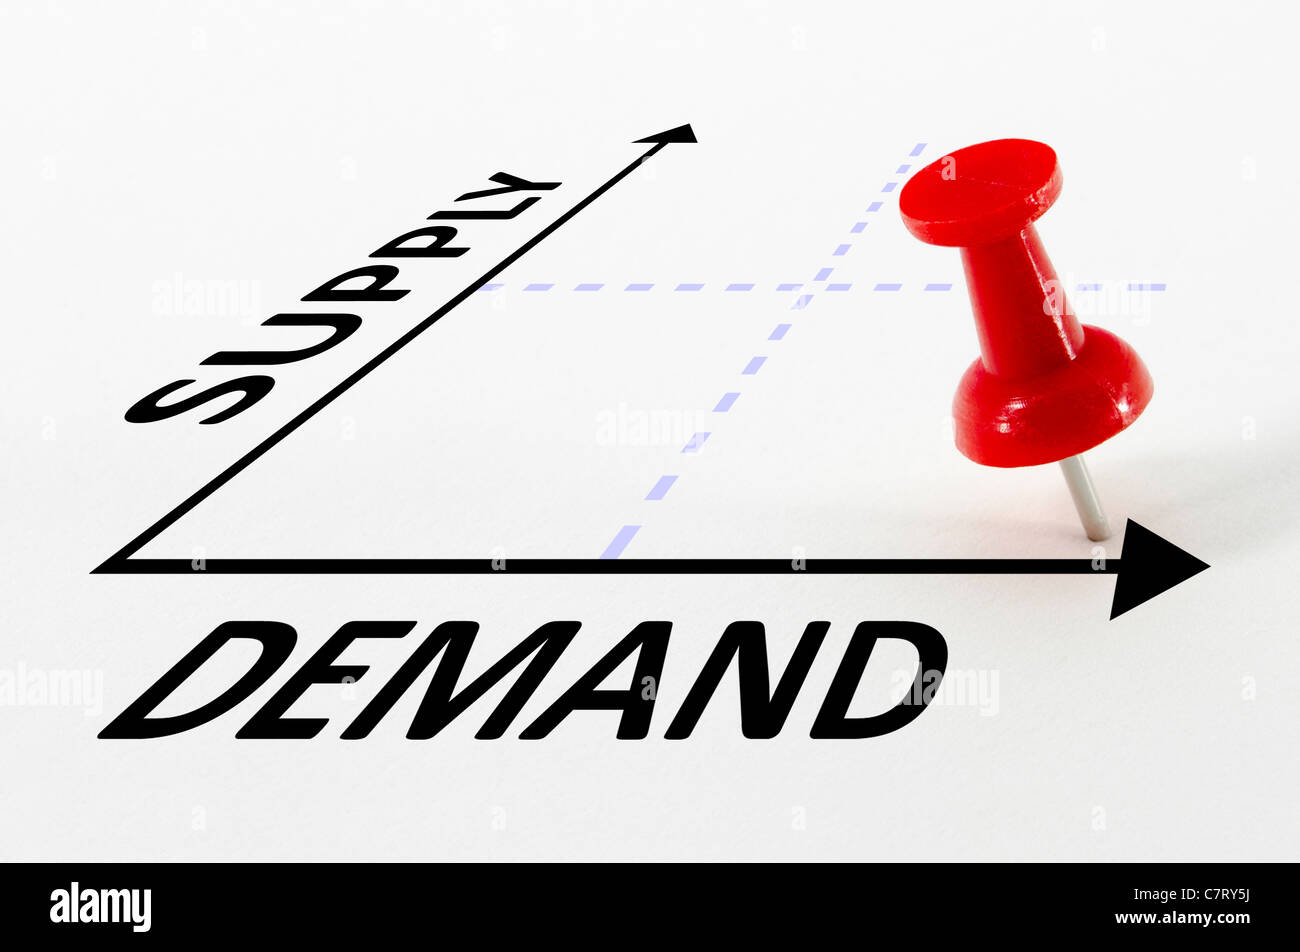 High Demand and Low Supply analysis concept on a graph with a red push pin Stock Photo